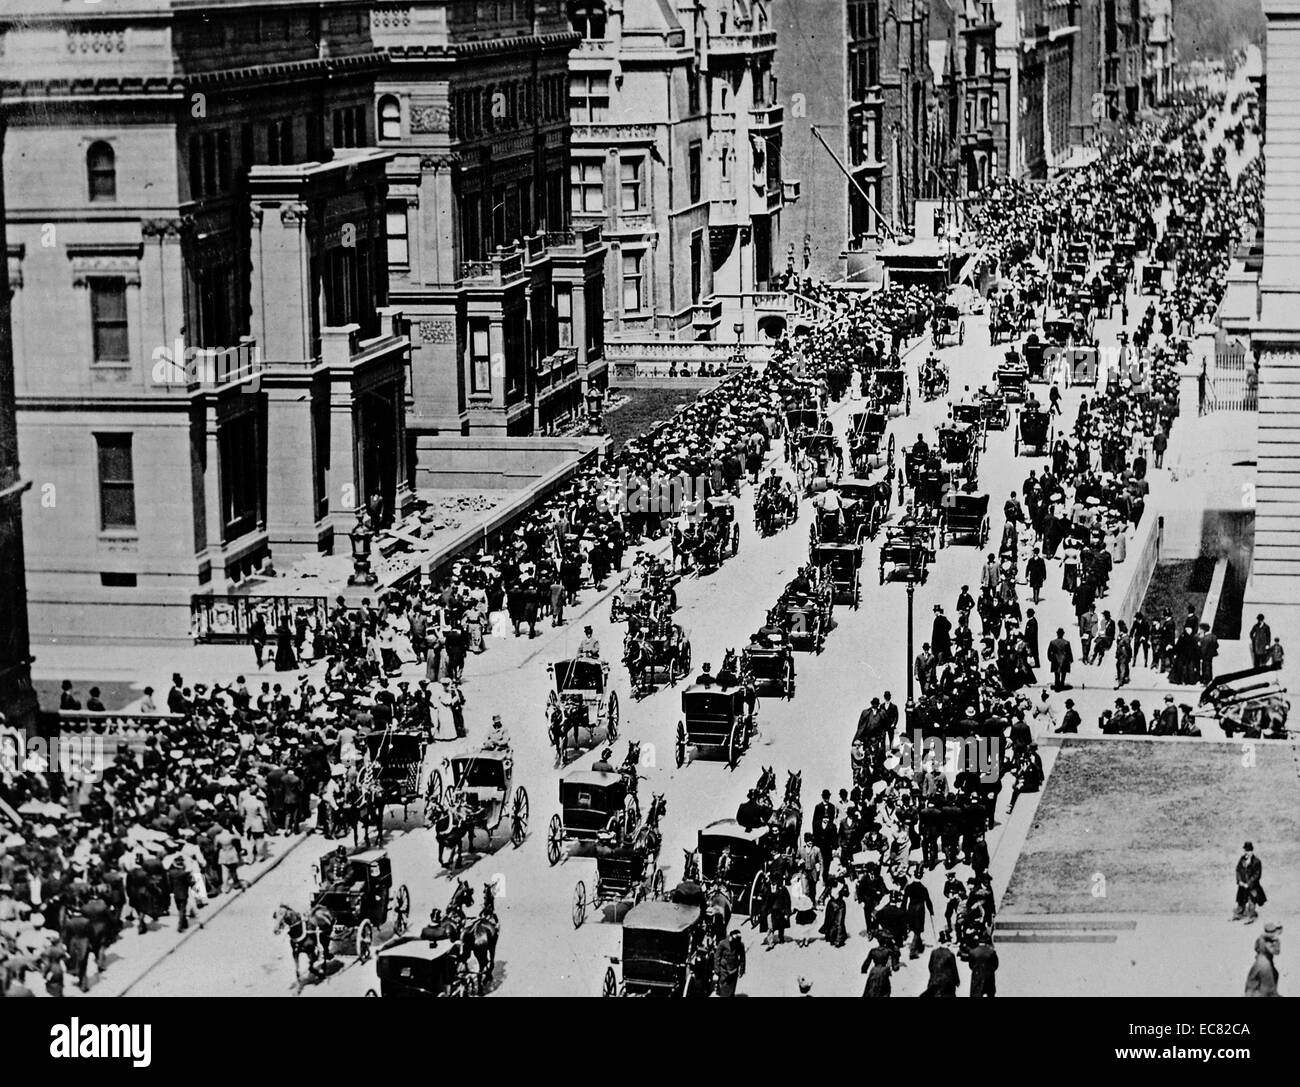 Canal Street New York probably early 1900s Stock Photo - Alamy